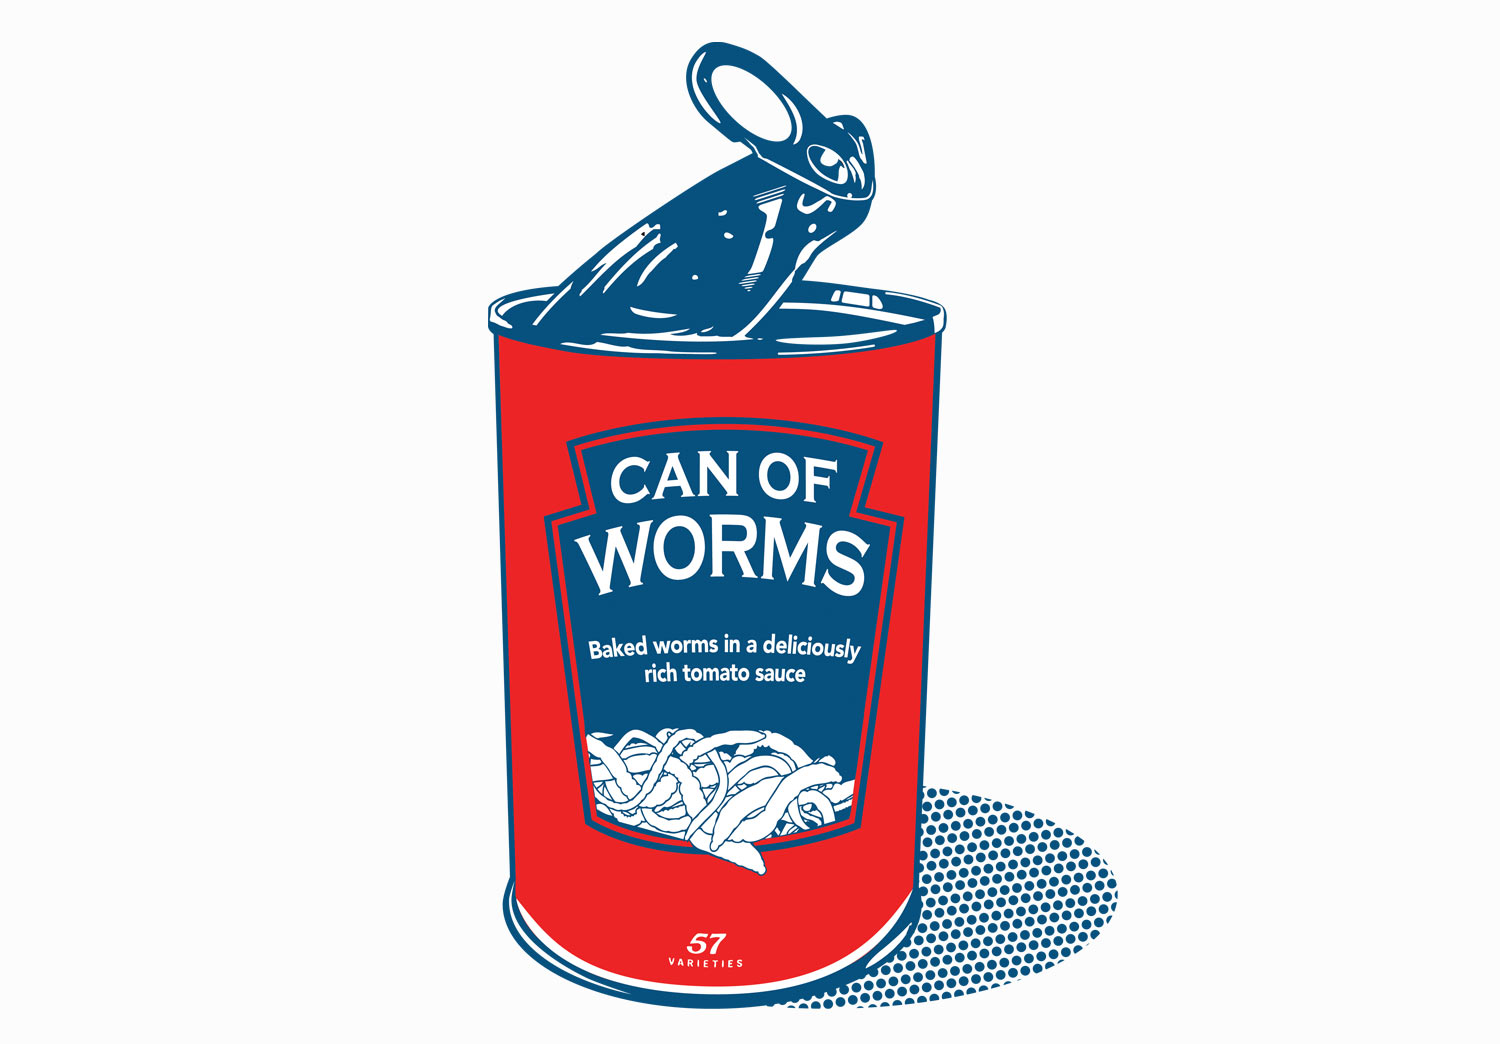 f65468bdde1234b3626bfabbac0d93a7_-can-of-worms-can-of-worms-clipart_1500-1044.jpeg